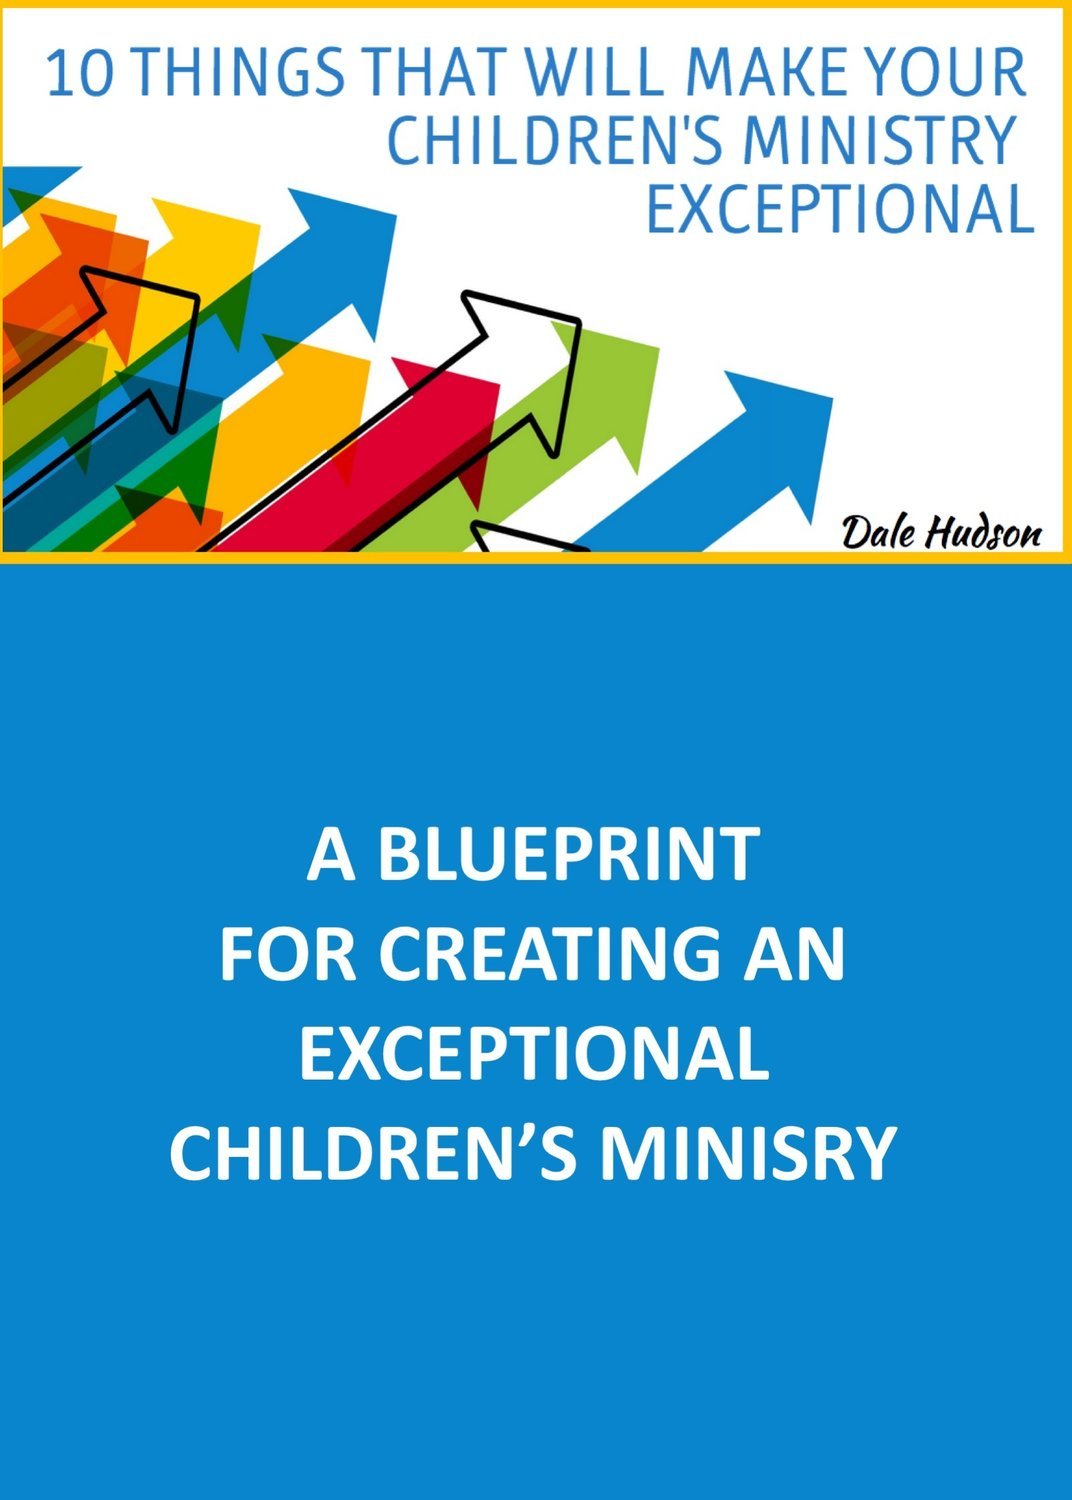 10 Things That Will Make Your Children's Ministry Exceptional